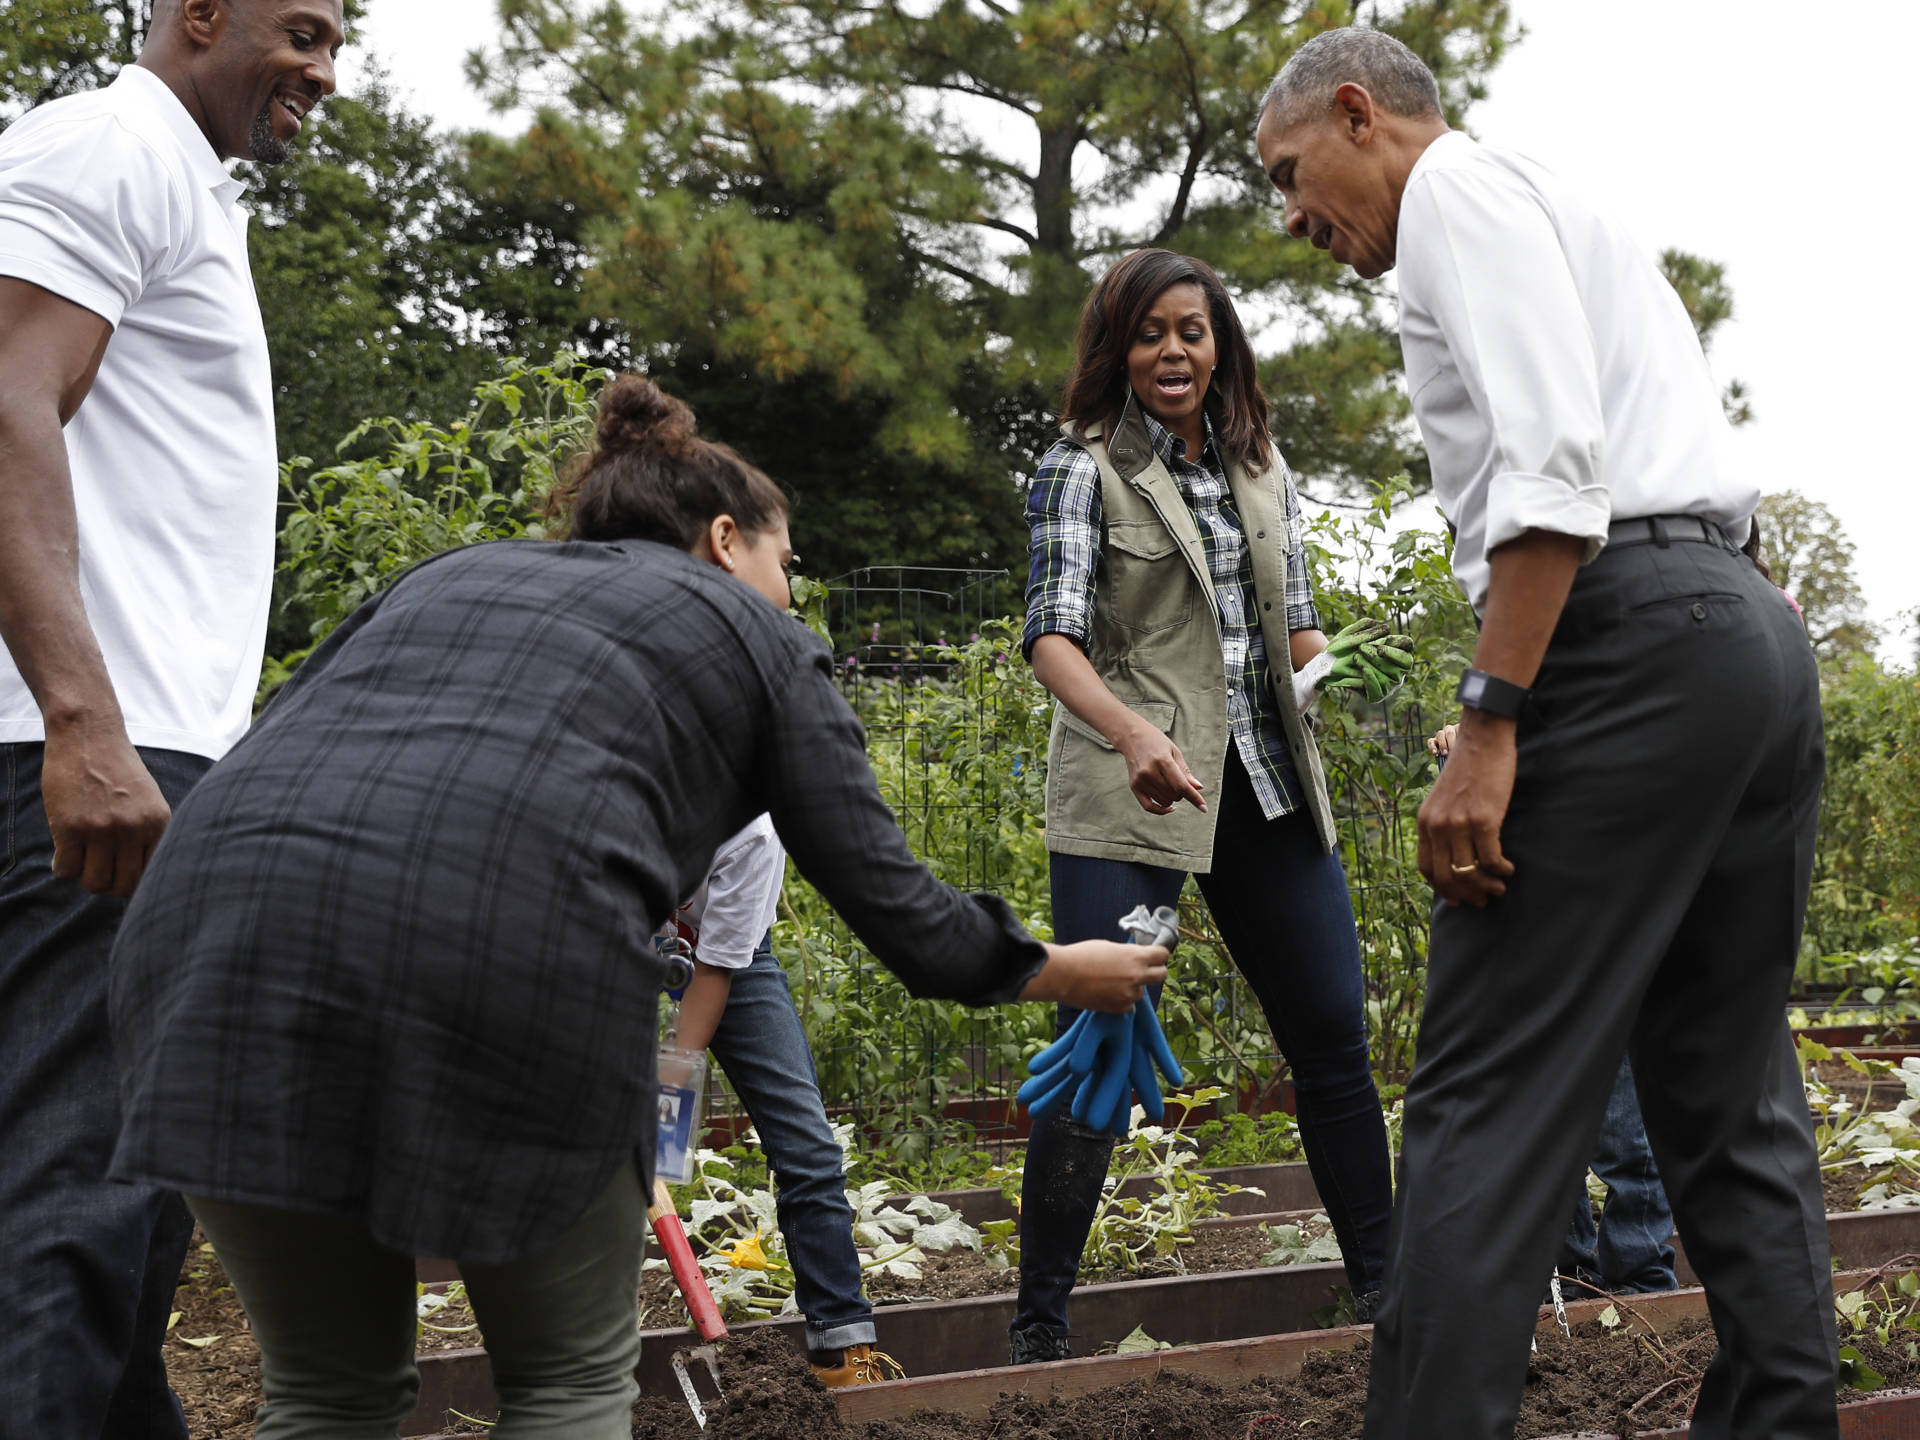 President Barack Obama is handed a pair of gardening gloves as first lady Michelle Obama, second from right, and NBA basketball player Alonzo Mourning, left, watch during the harvest of the White House Kitchen Garden on the South Lawn White House in Washington.